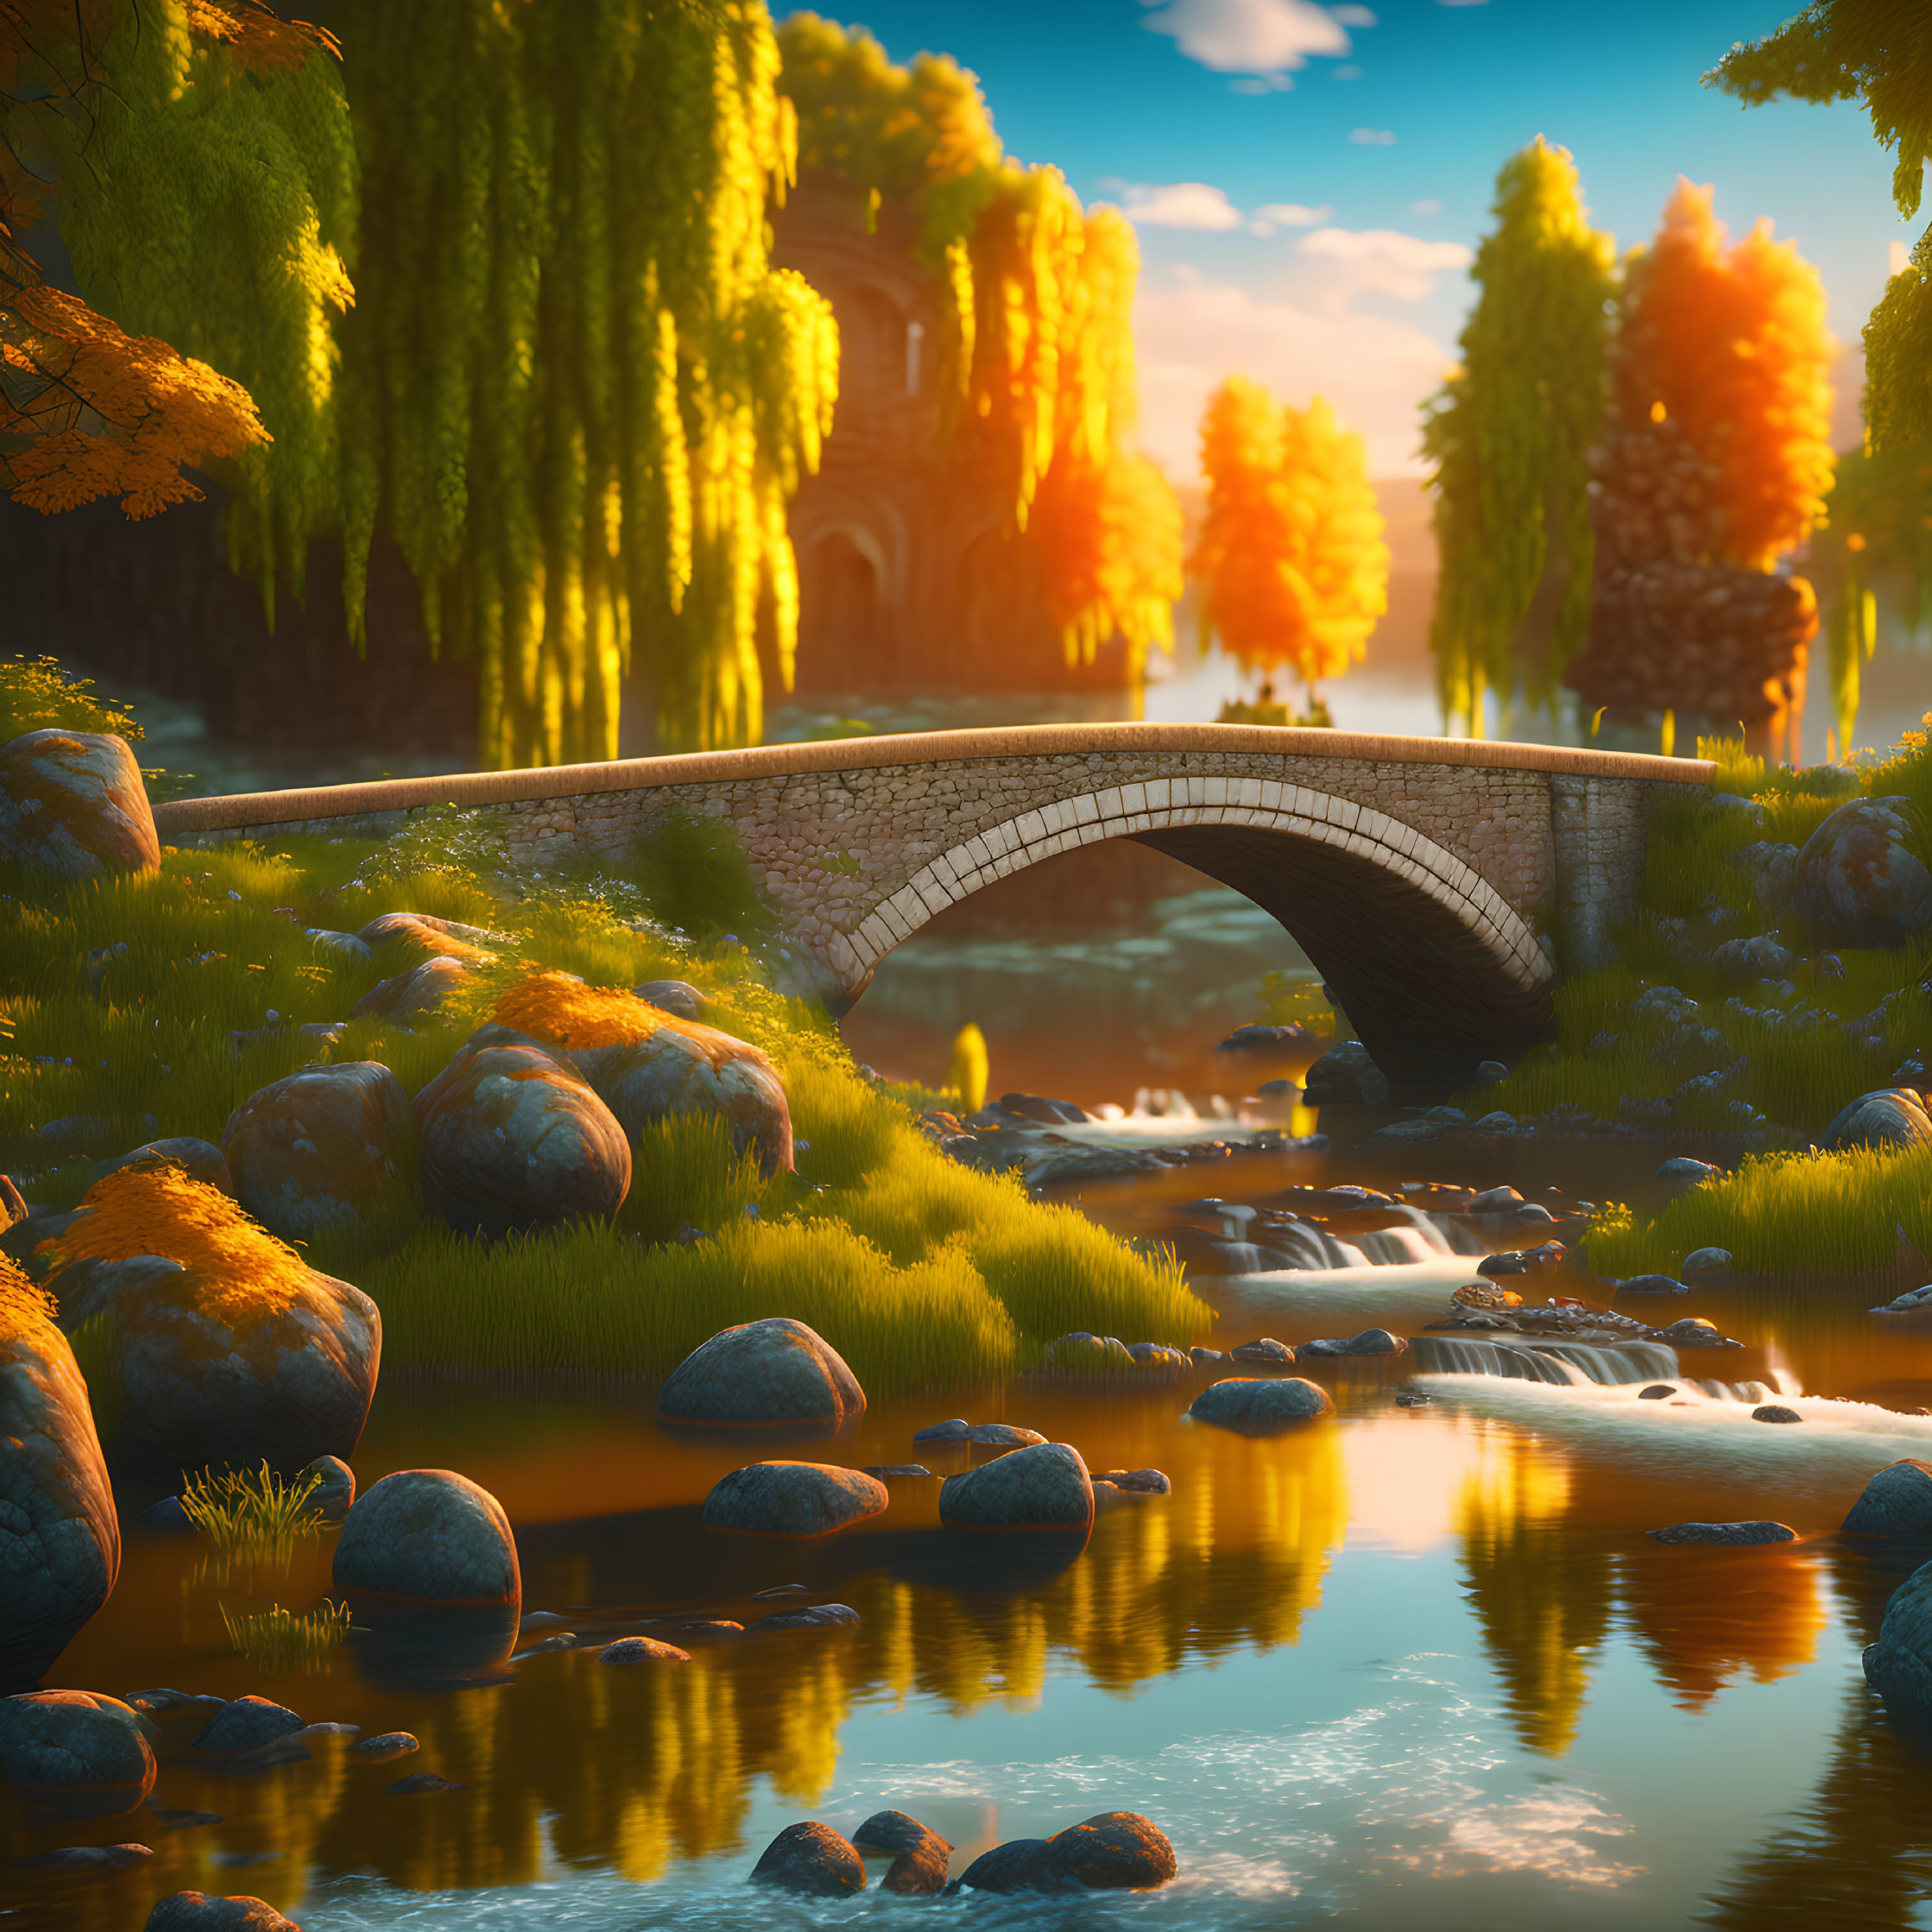 Tranquil landscape with stone bridge over stream amid autumn trees